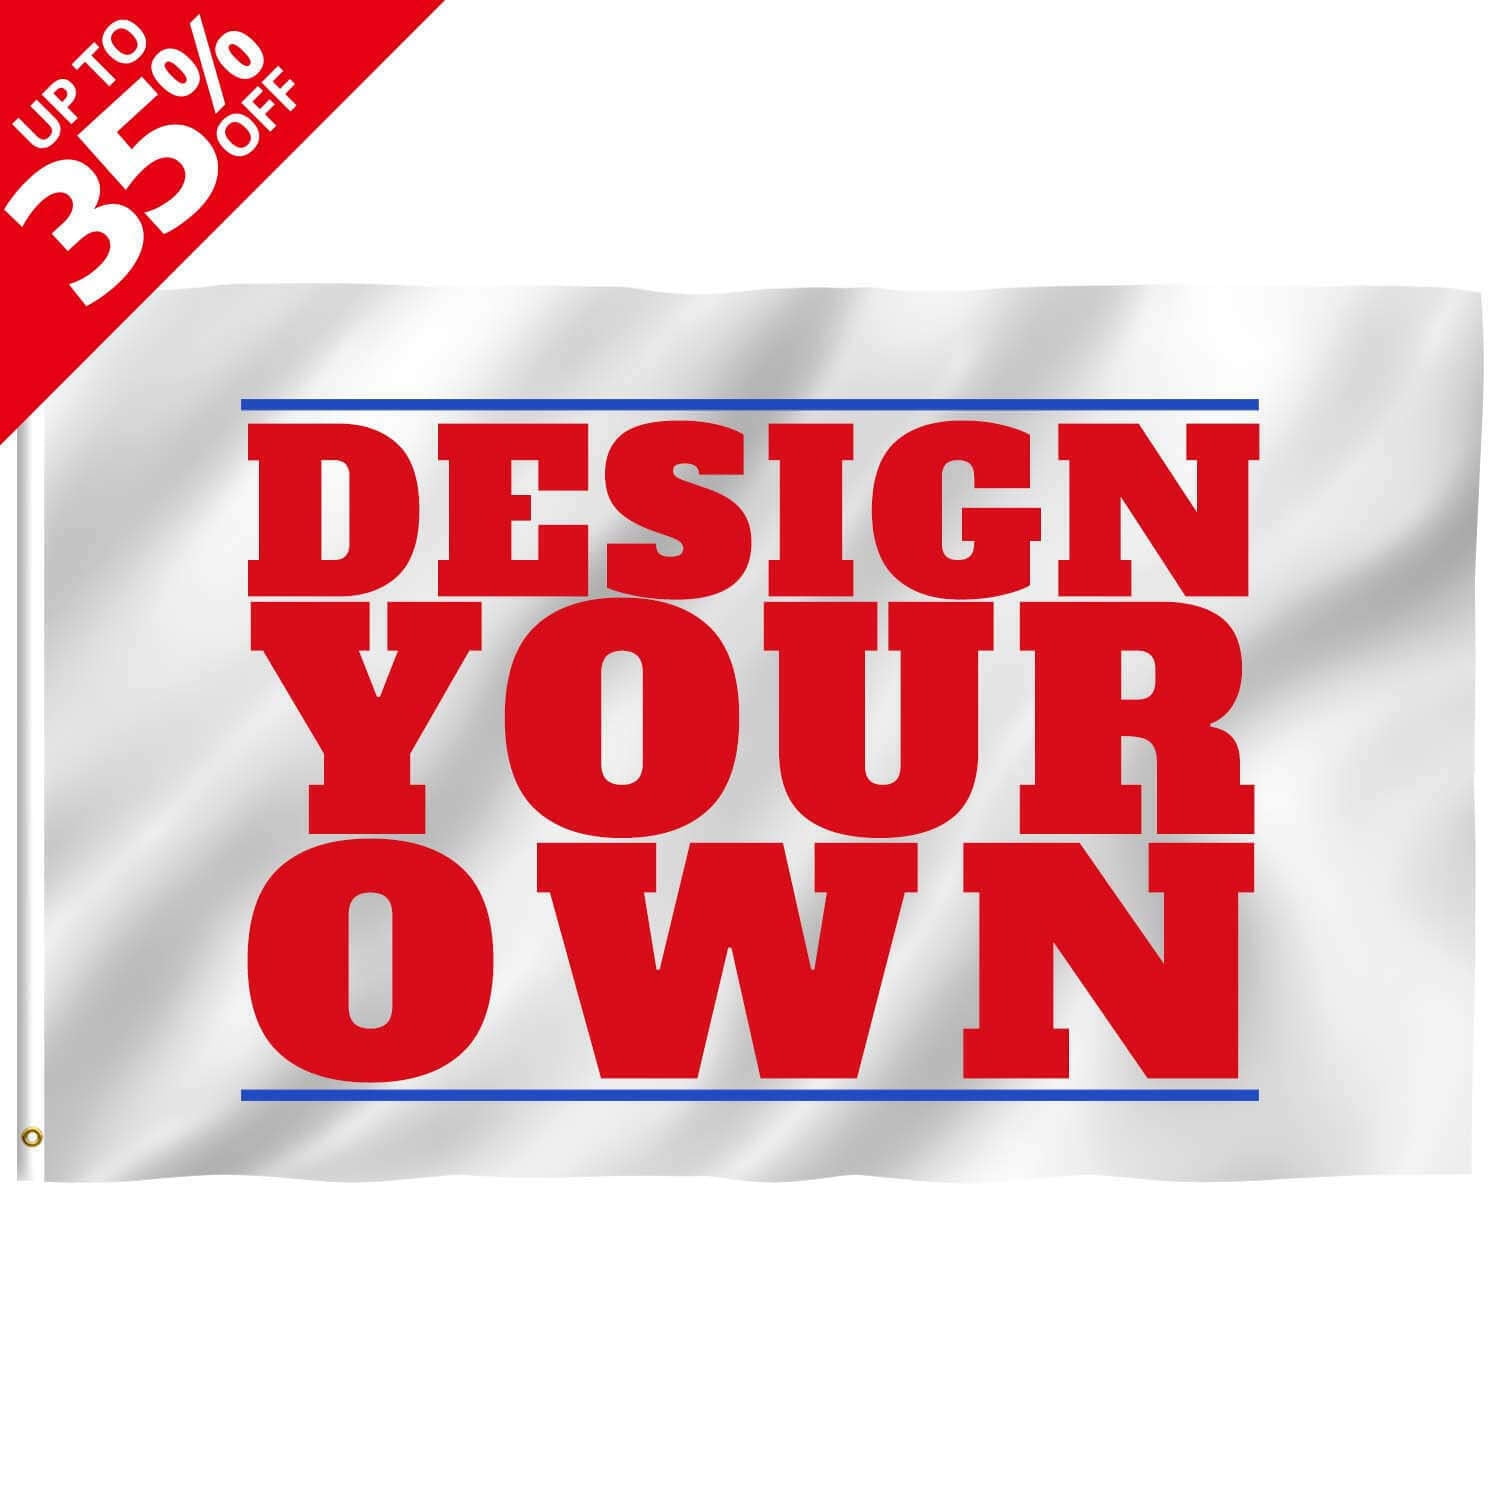 2x3 HOT & FRESH COFFEE Red & White Banner Sign NEW Discount Size FREE SHIP 